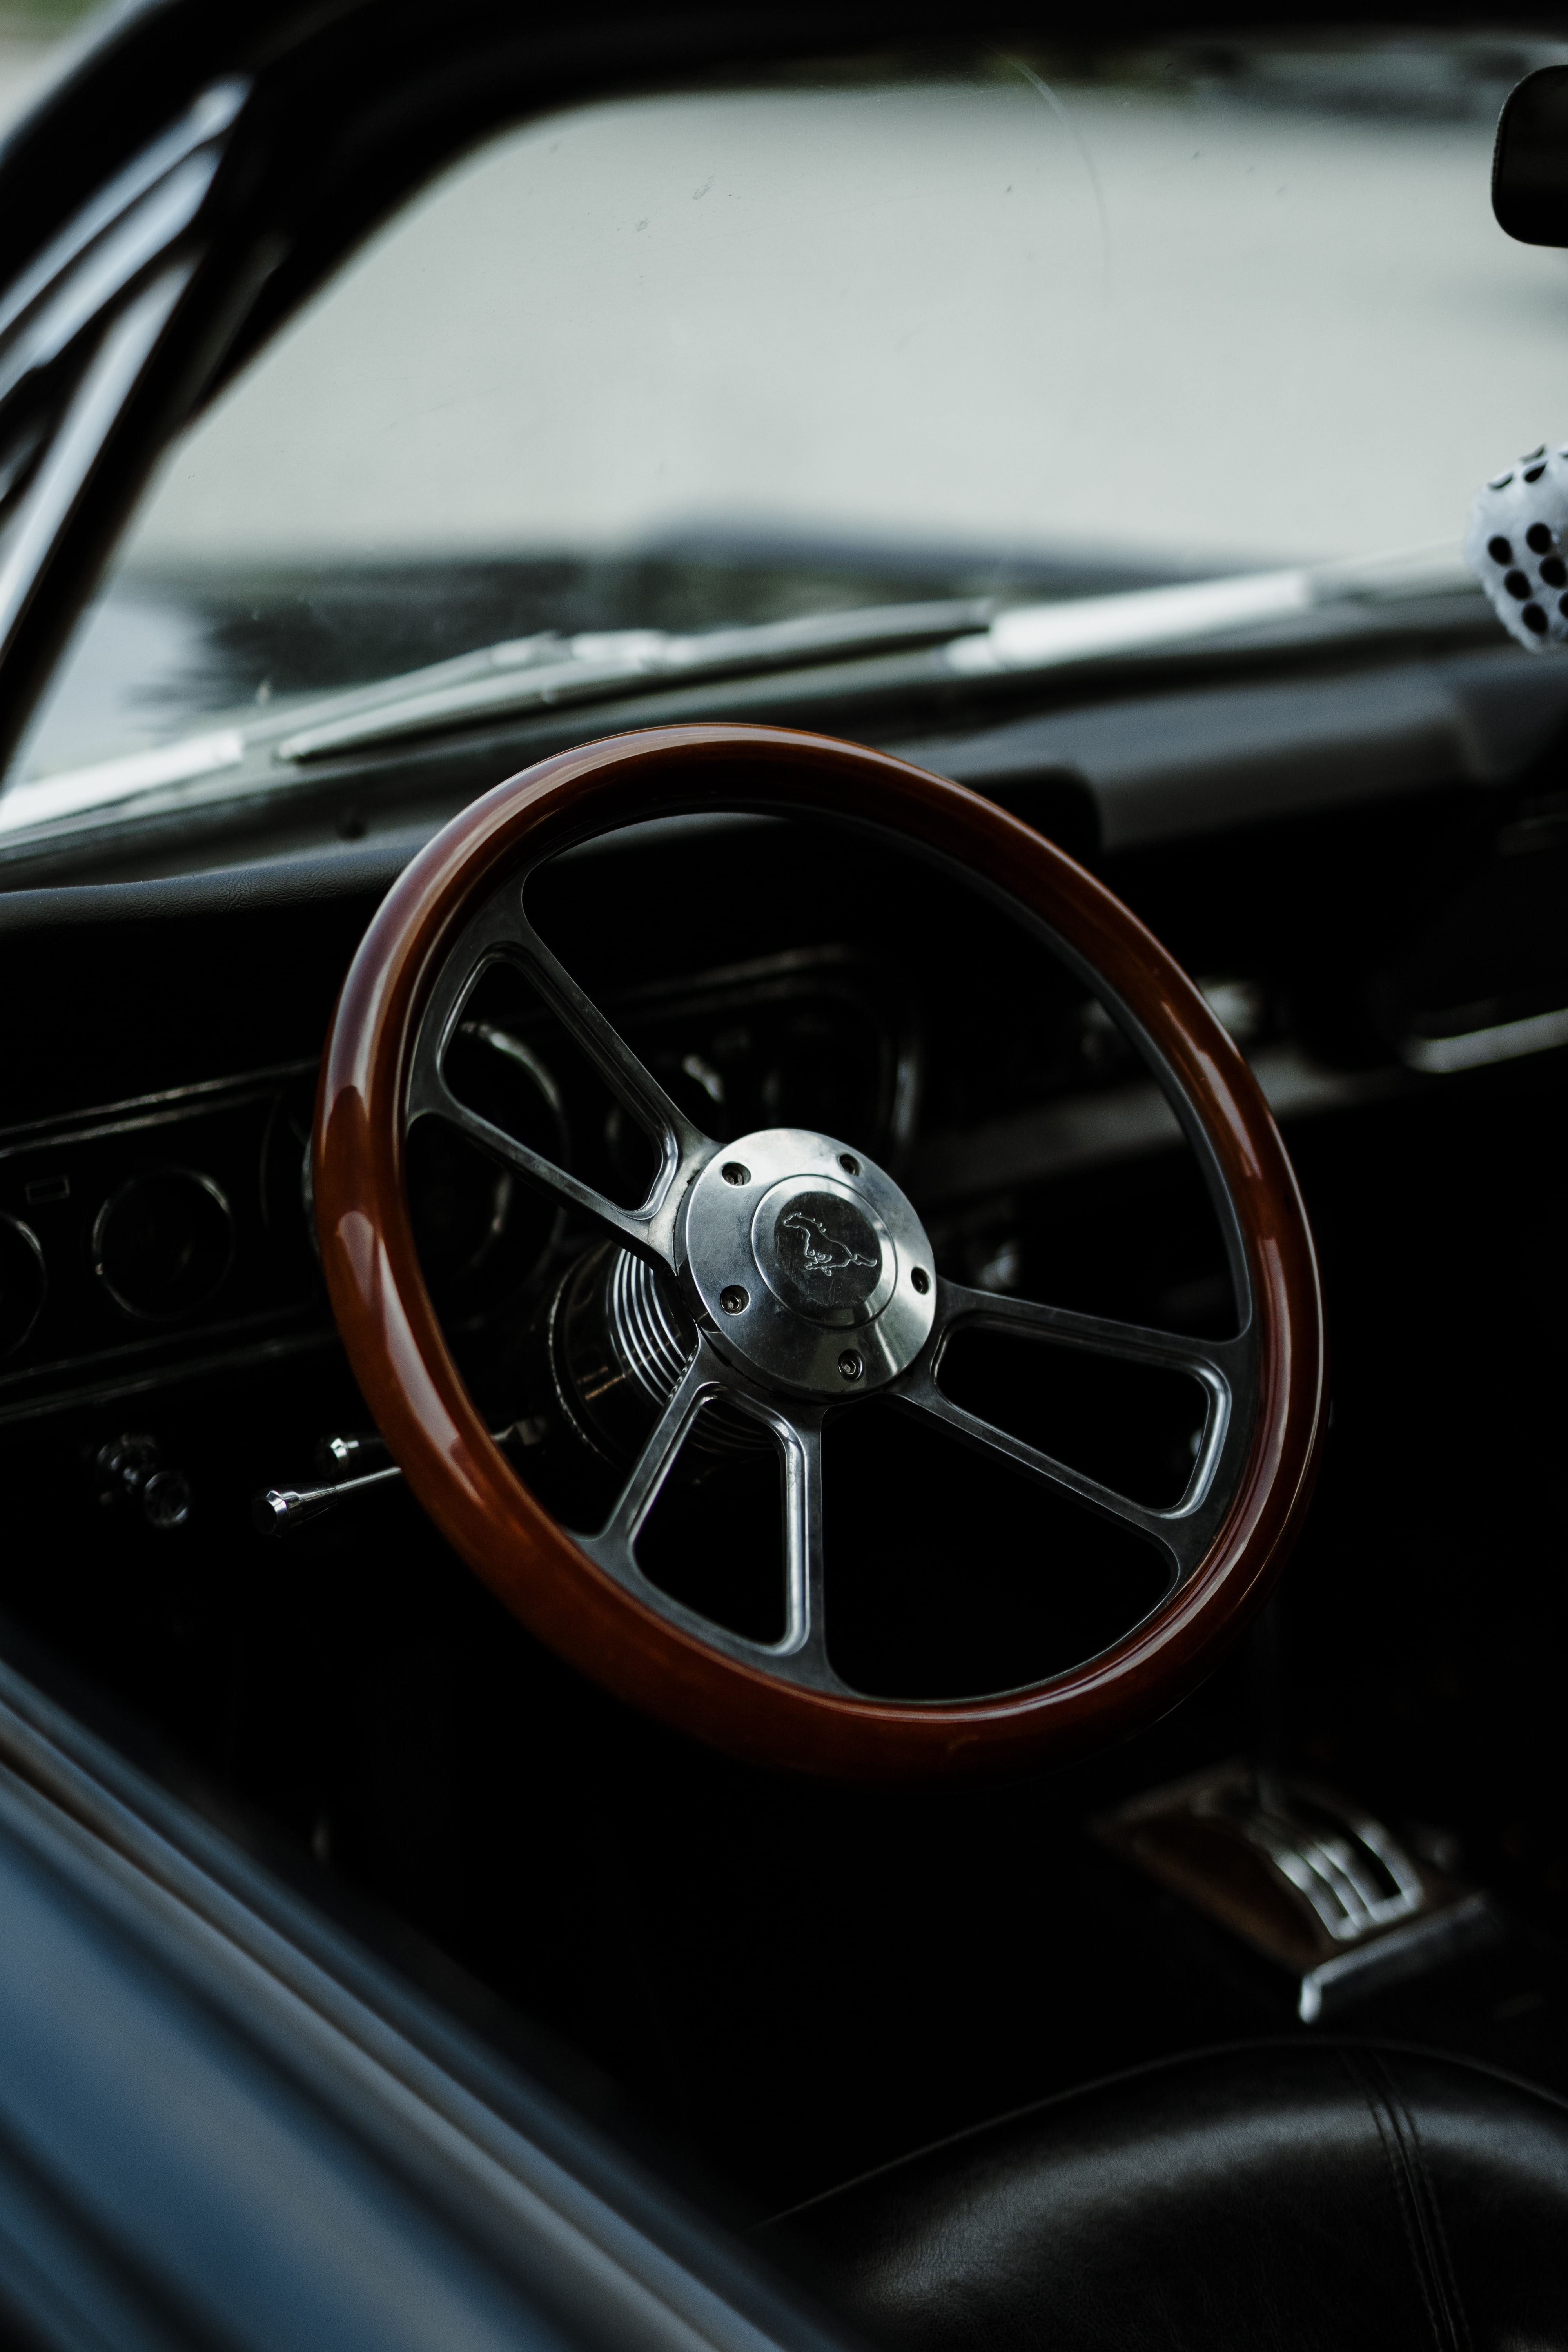 84363 Screensavers and Wallpapers Steering Wheel for phone. Download mustang, cars, car, vintage, retro, steering wheel, rudder pictures for free